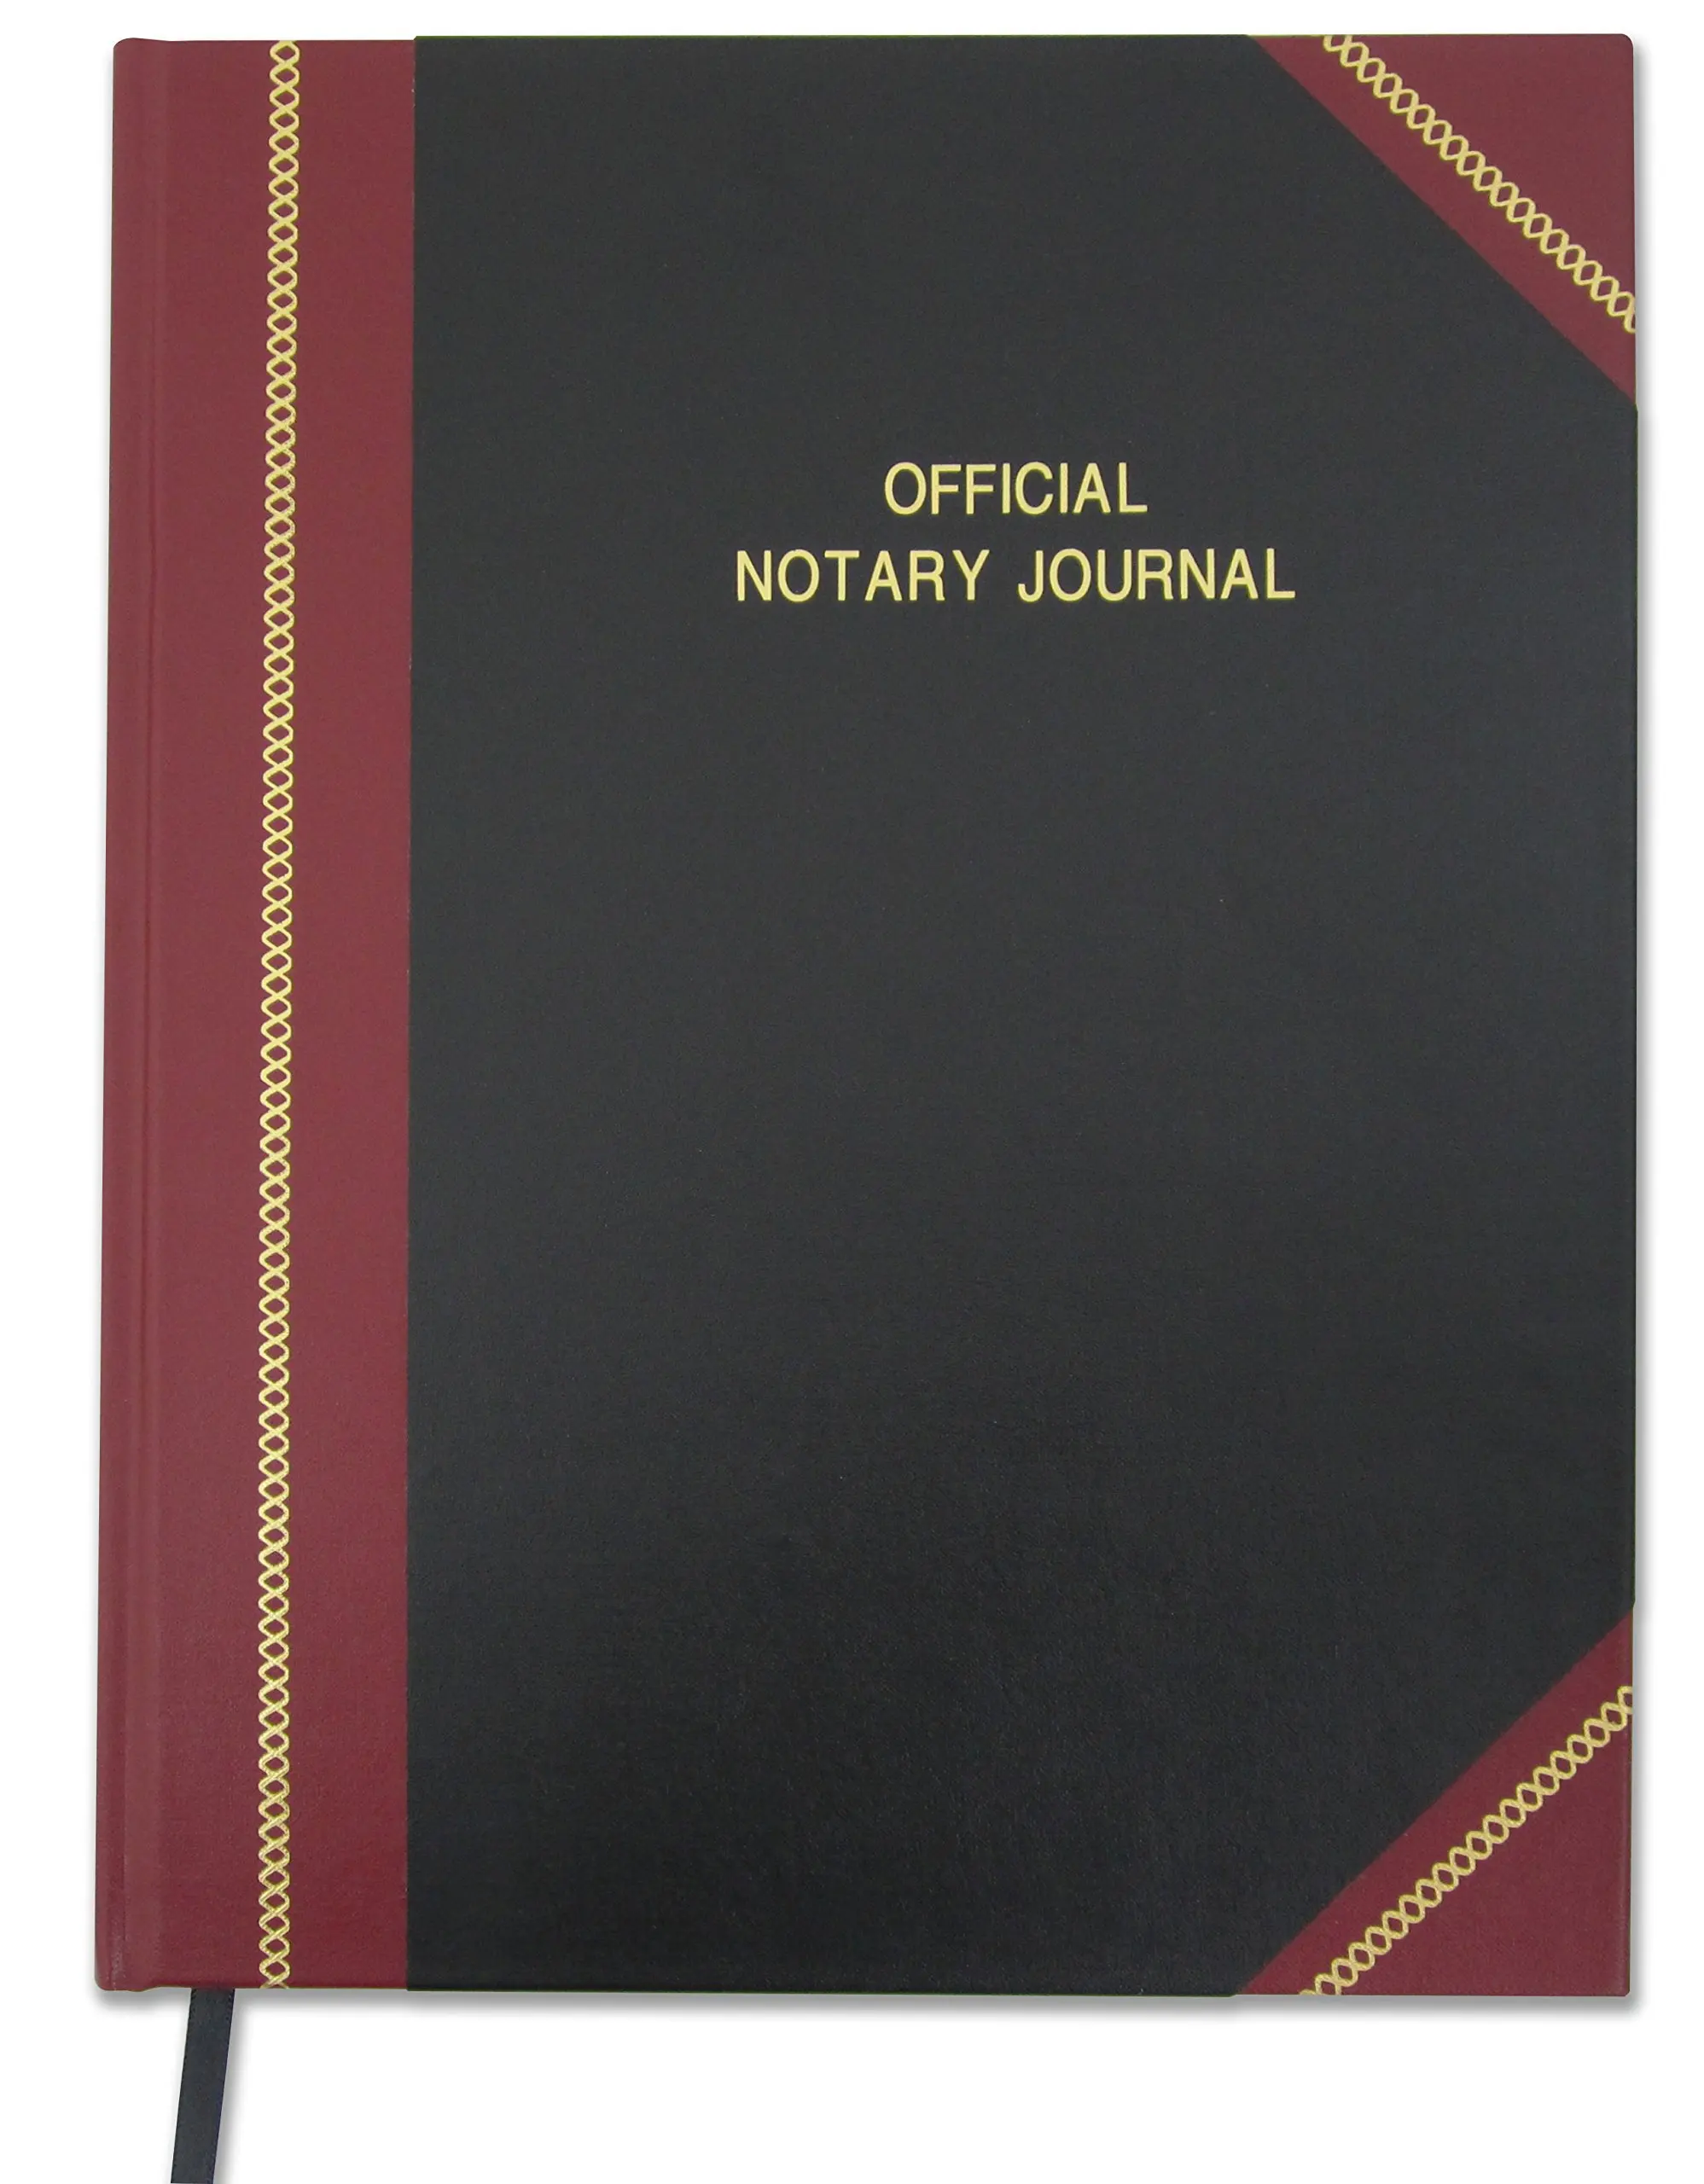 notary journal with privacy guard